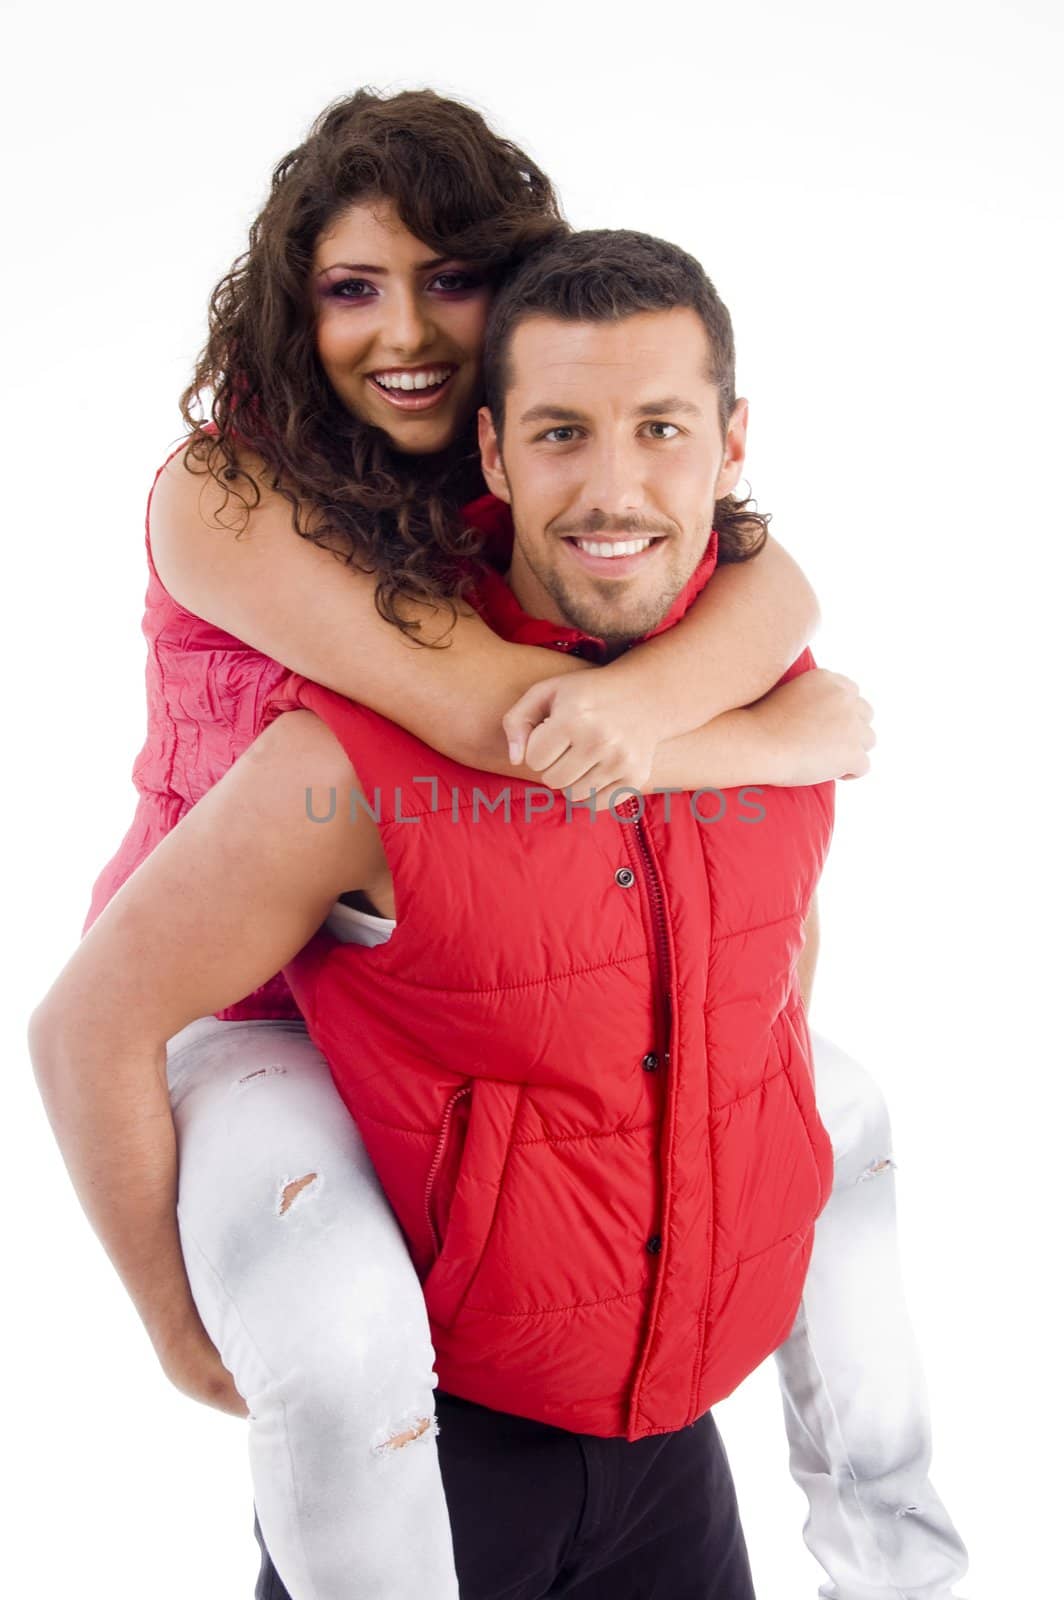 young male carrying woman piggyback by imagerymajestic